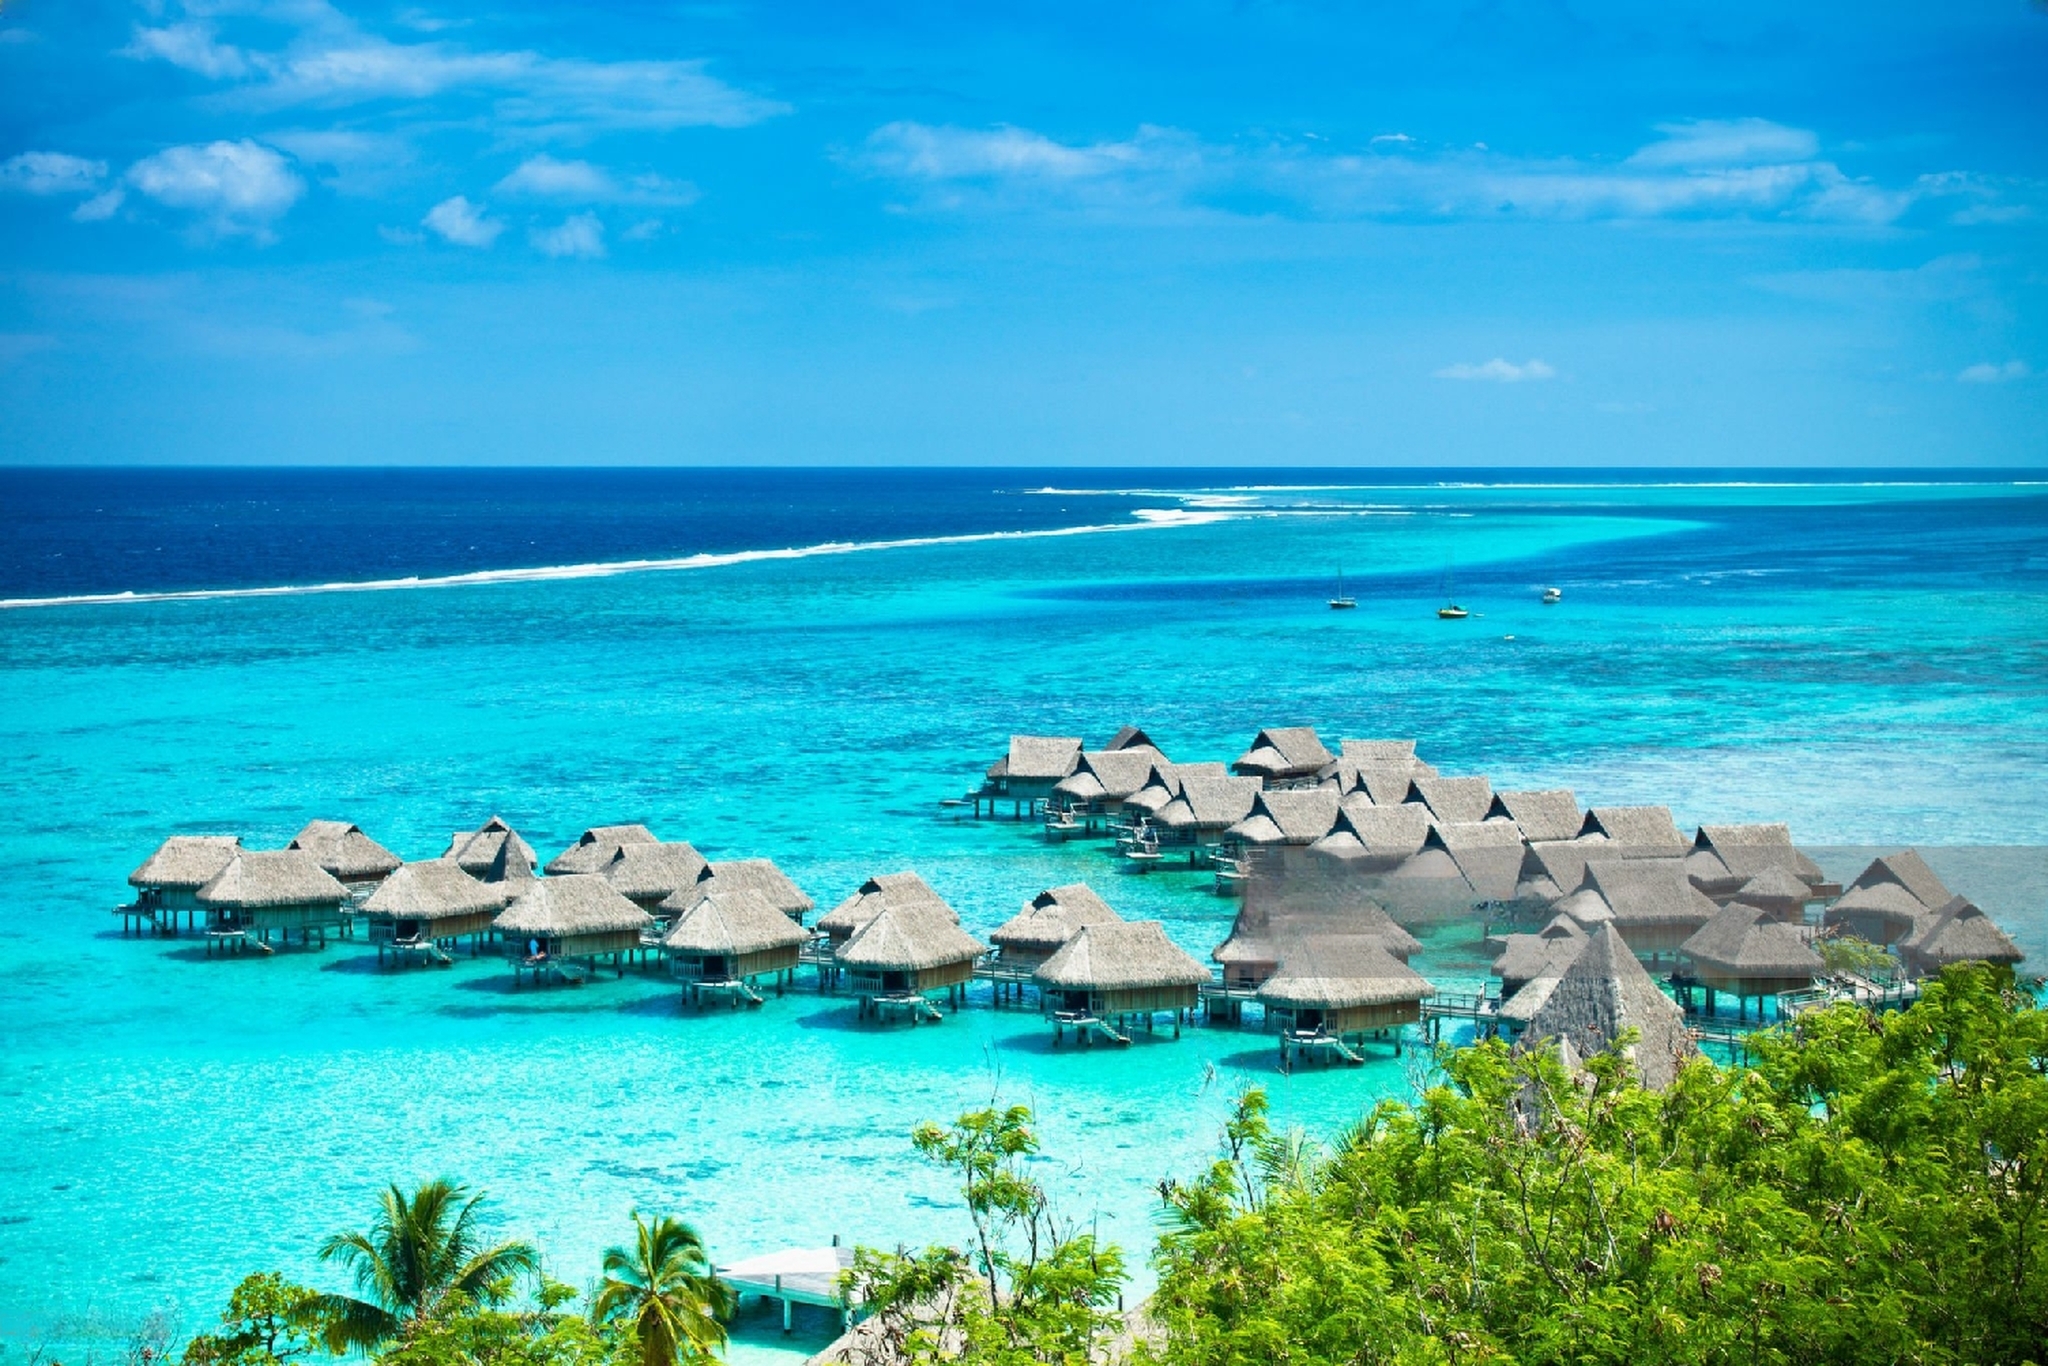 Bora Bora Overwater Bungalows: Is the High Cost Worth It? We Investigate